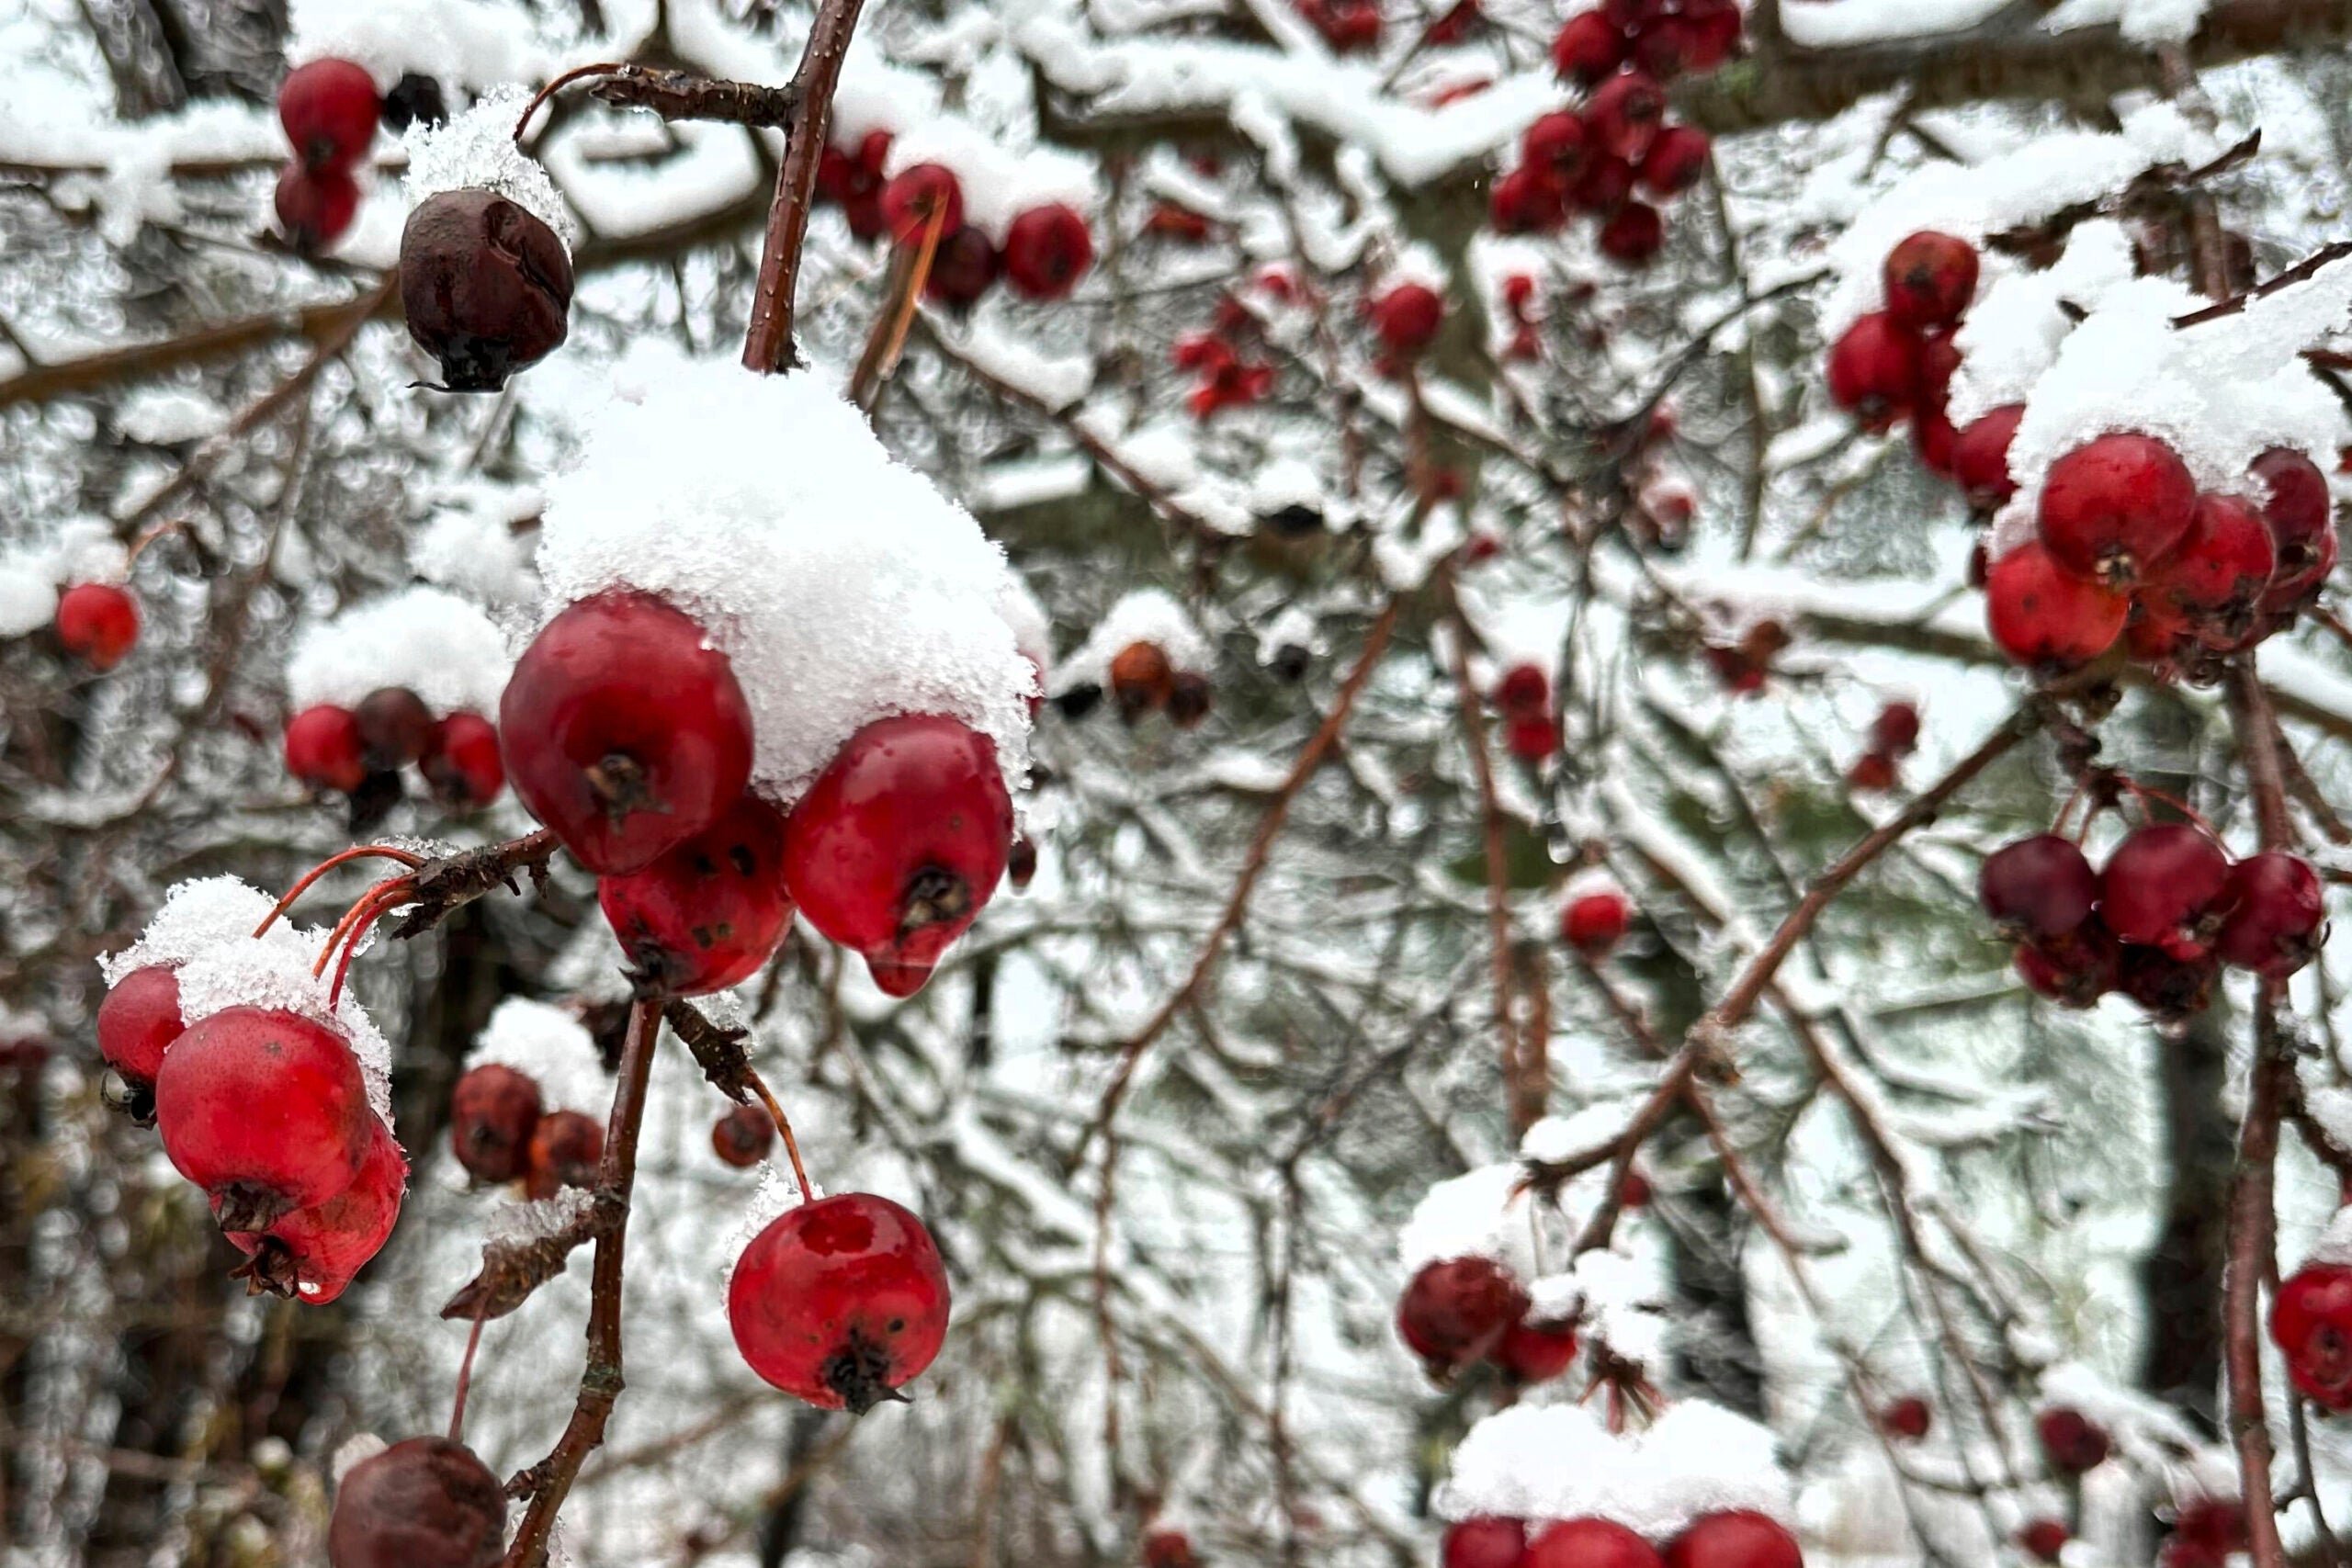 Snow clings to berries on a tree in Portland, Maine.